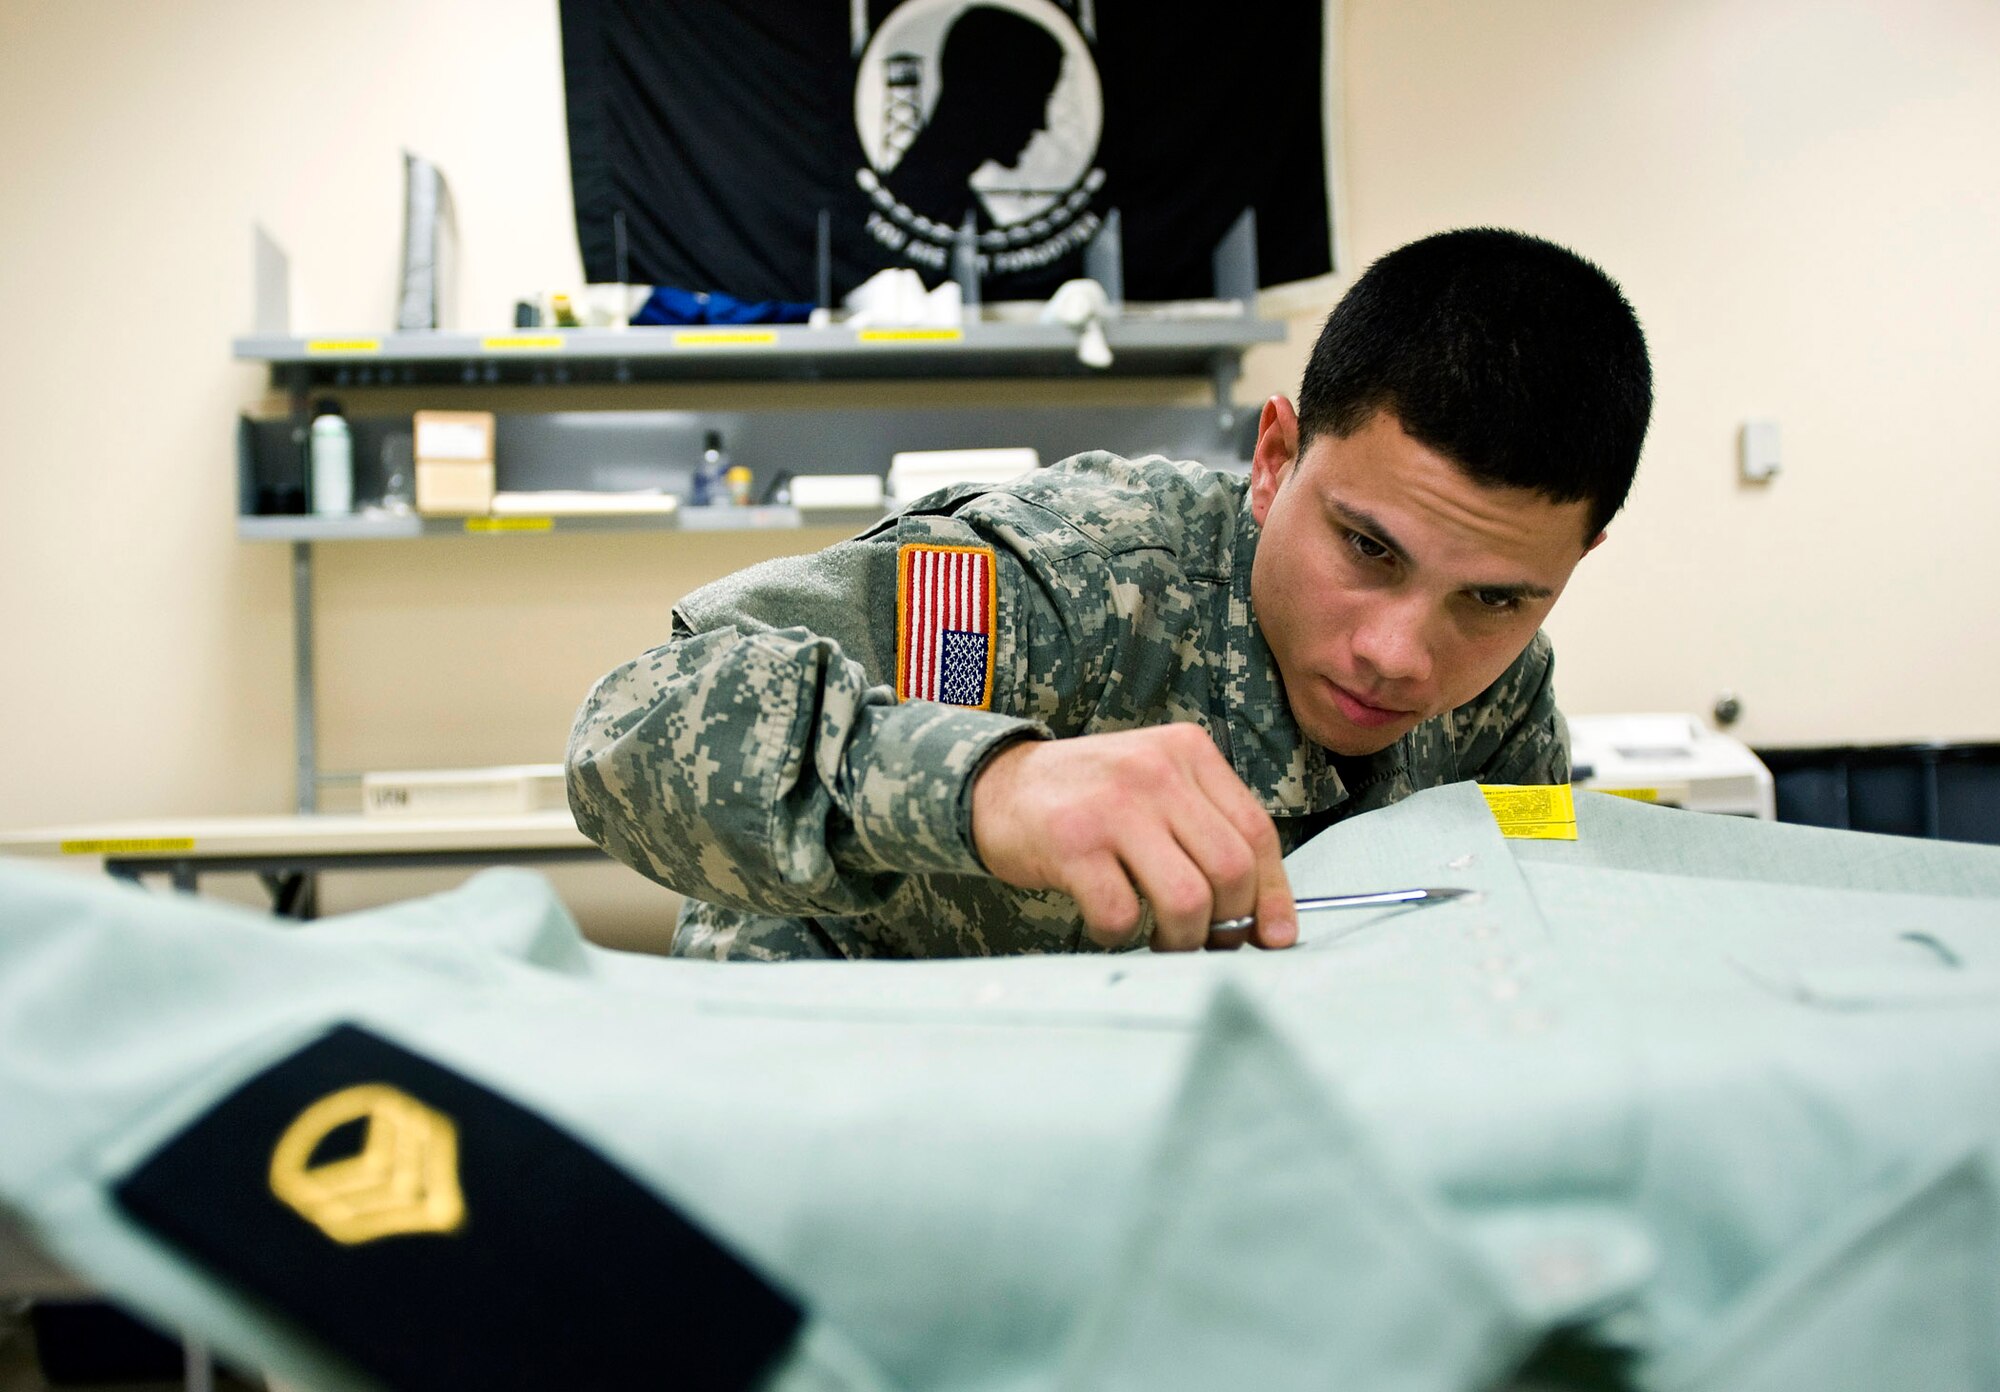 Specialist Xavier Gonzalez, a mortuary affairs specialist, prepares a U.S. Army service dress shirt for a fallen solider March 31. Servicemembers working in the uniform section of the Air Force Mortuary Affairs Operations Center at Dover Air Force Base, Del., prepare uniforms for the fallen heroes and work with military escorts for the dignified-transfer-of-remains process.  Specialist Gonzalez is deployed from the Army Reserve, 311th Quartermaster Company in Puerto Rico.  (U.S. Air Force photo/Staff Sgt. Bennie J. Davis III)